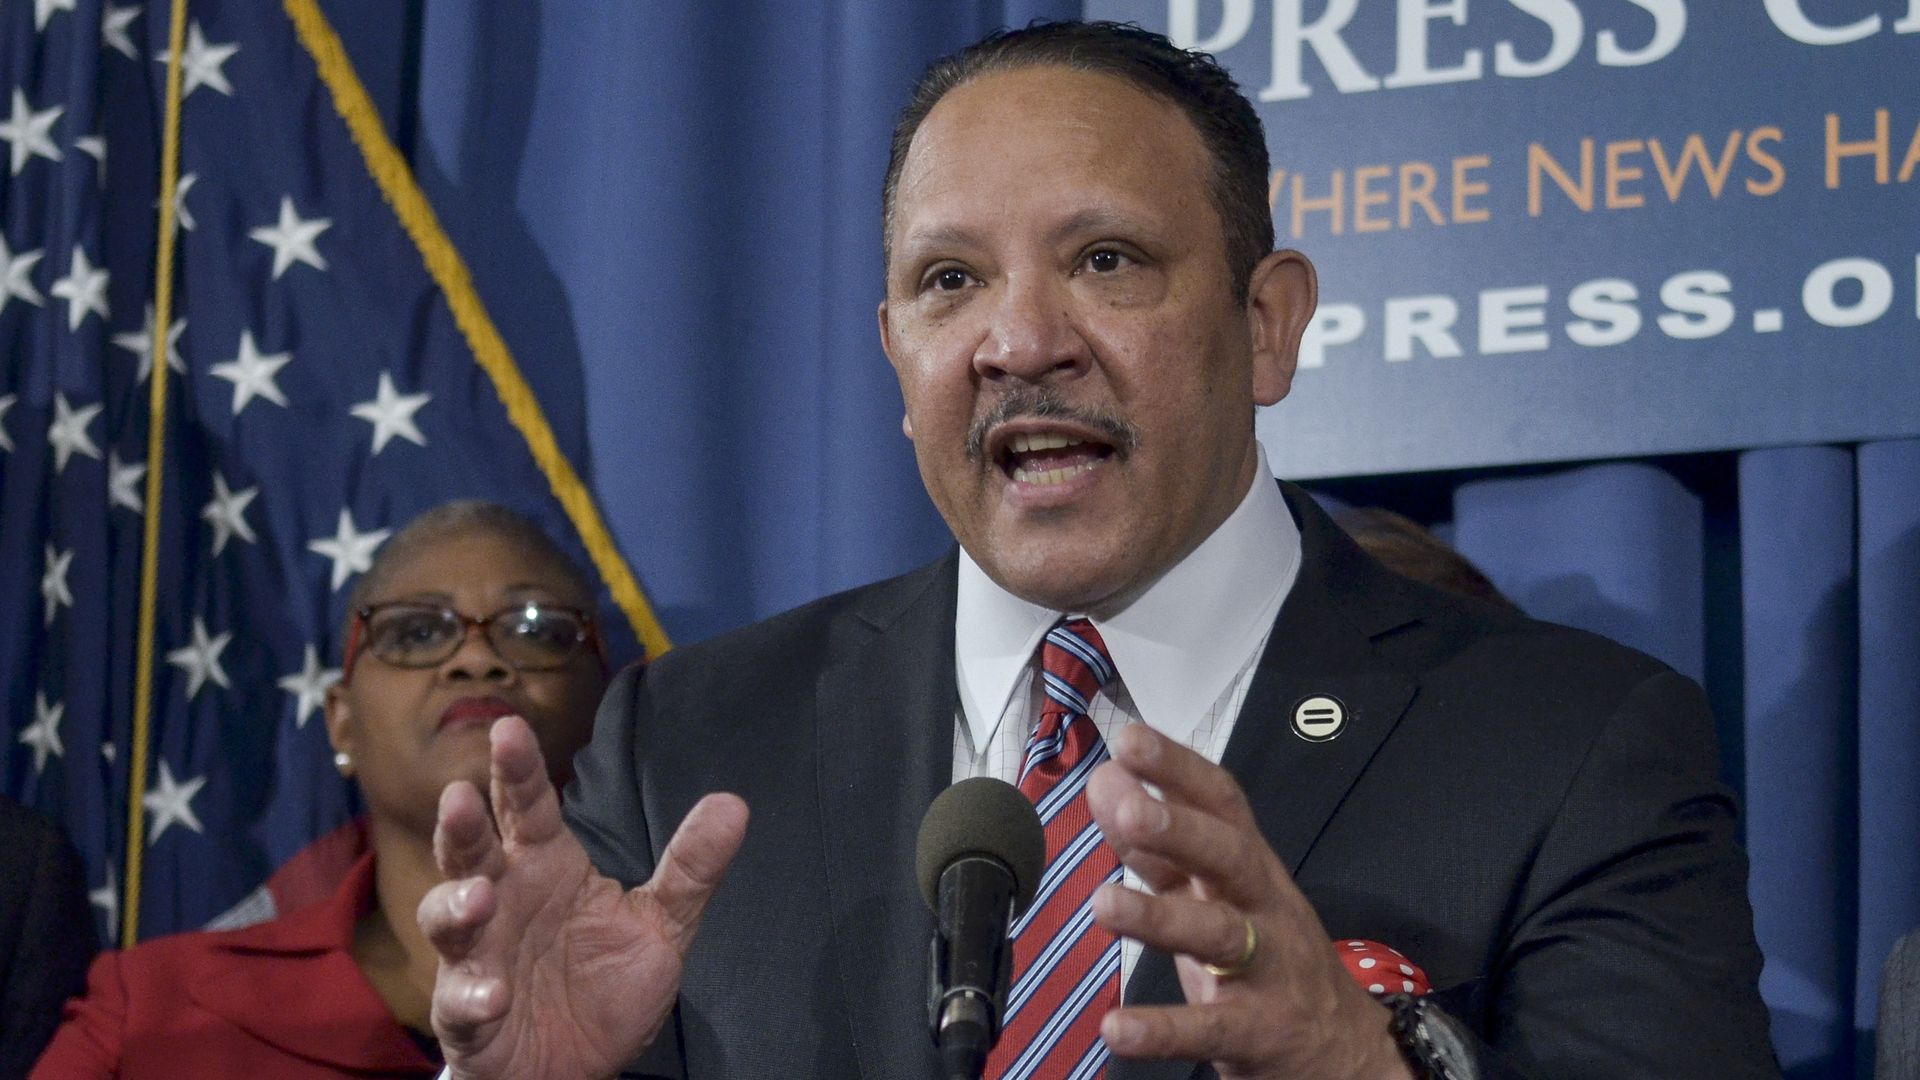 Marc Morial, president of the National Urban League speaks during a press conference, at the National Press Club.